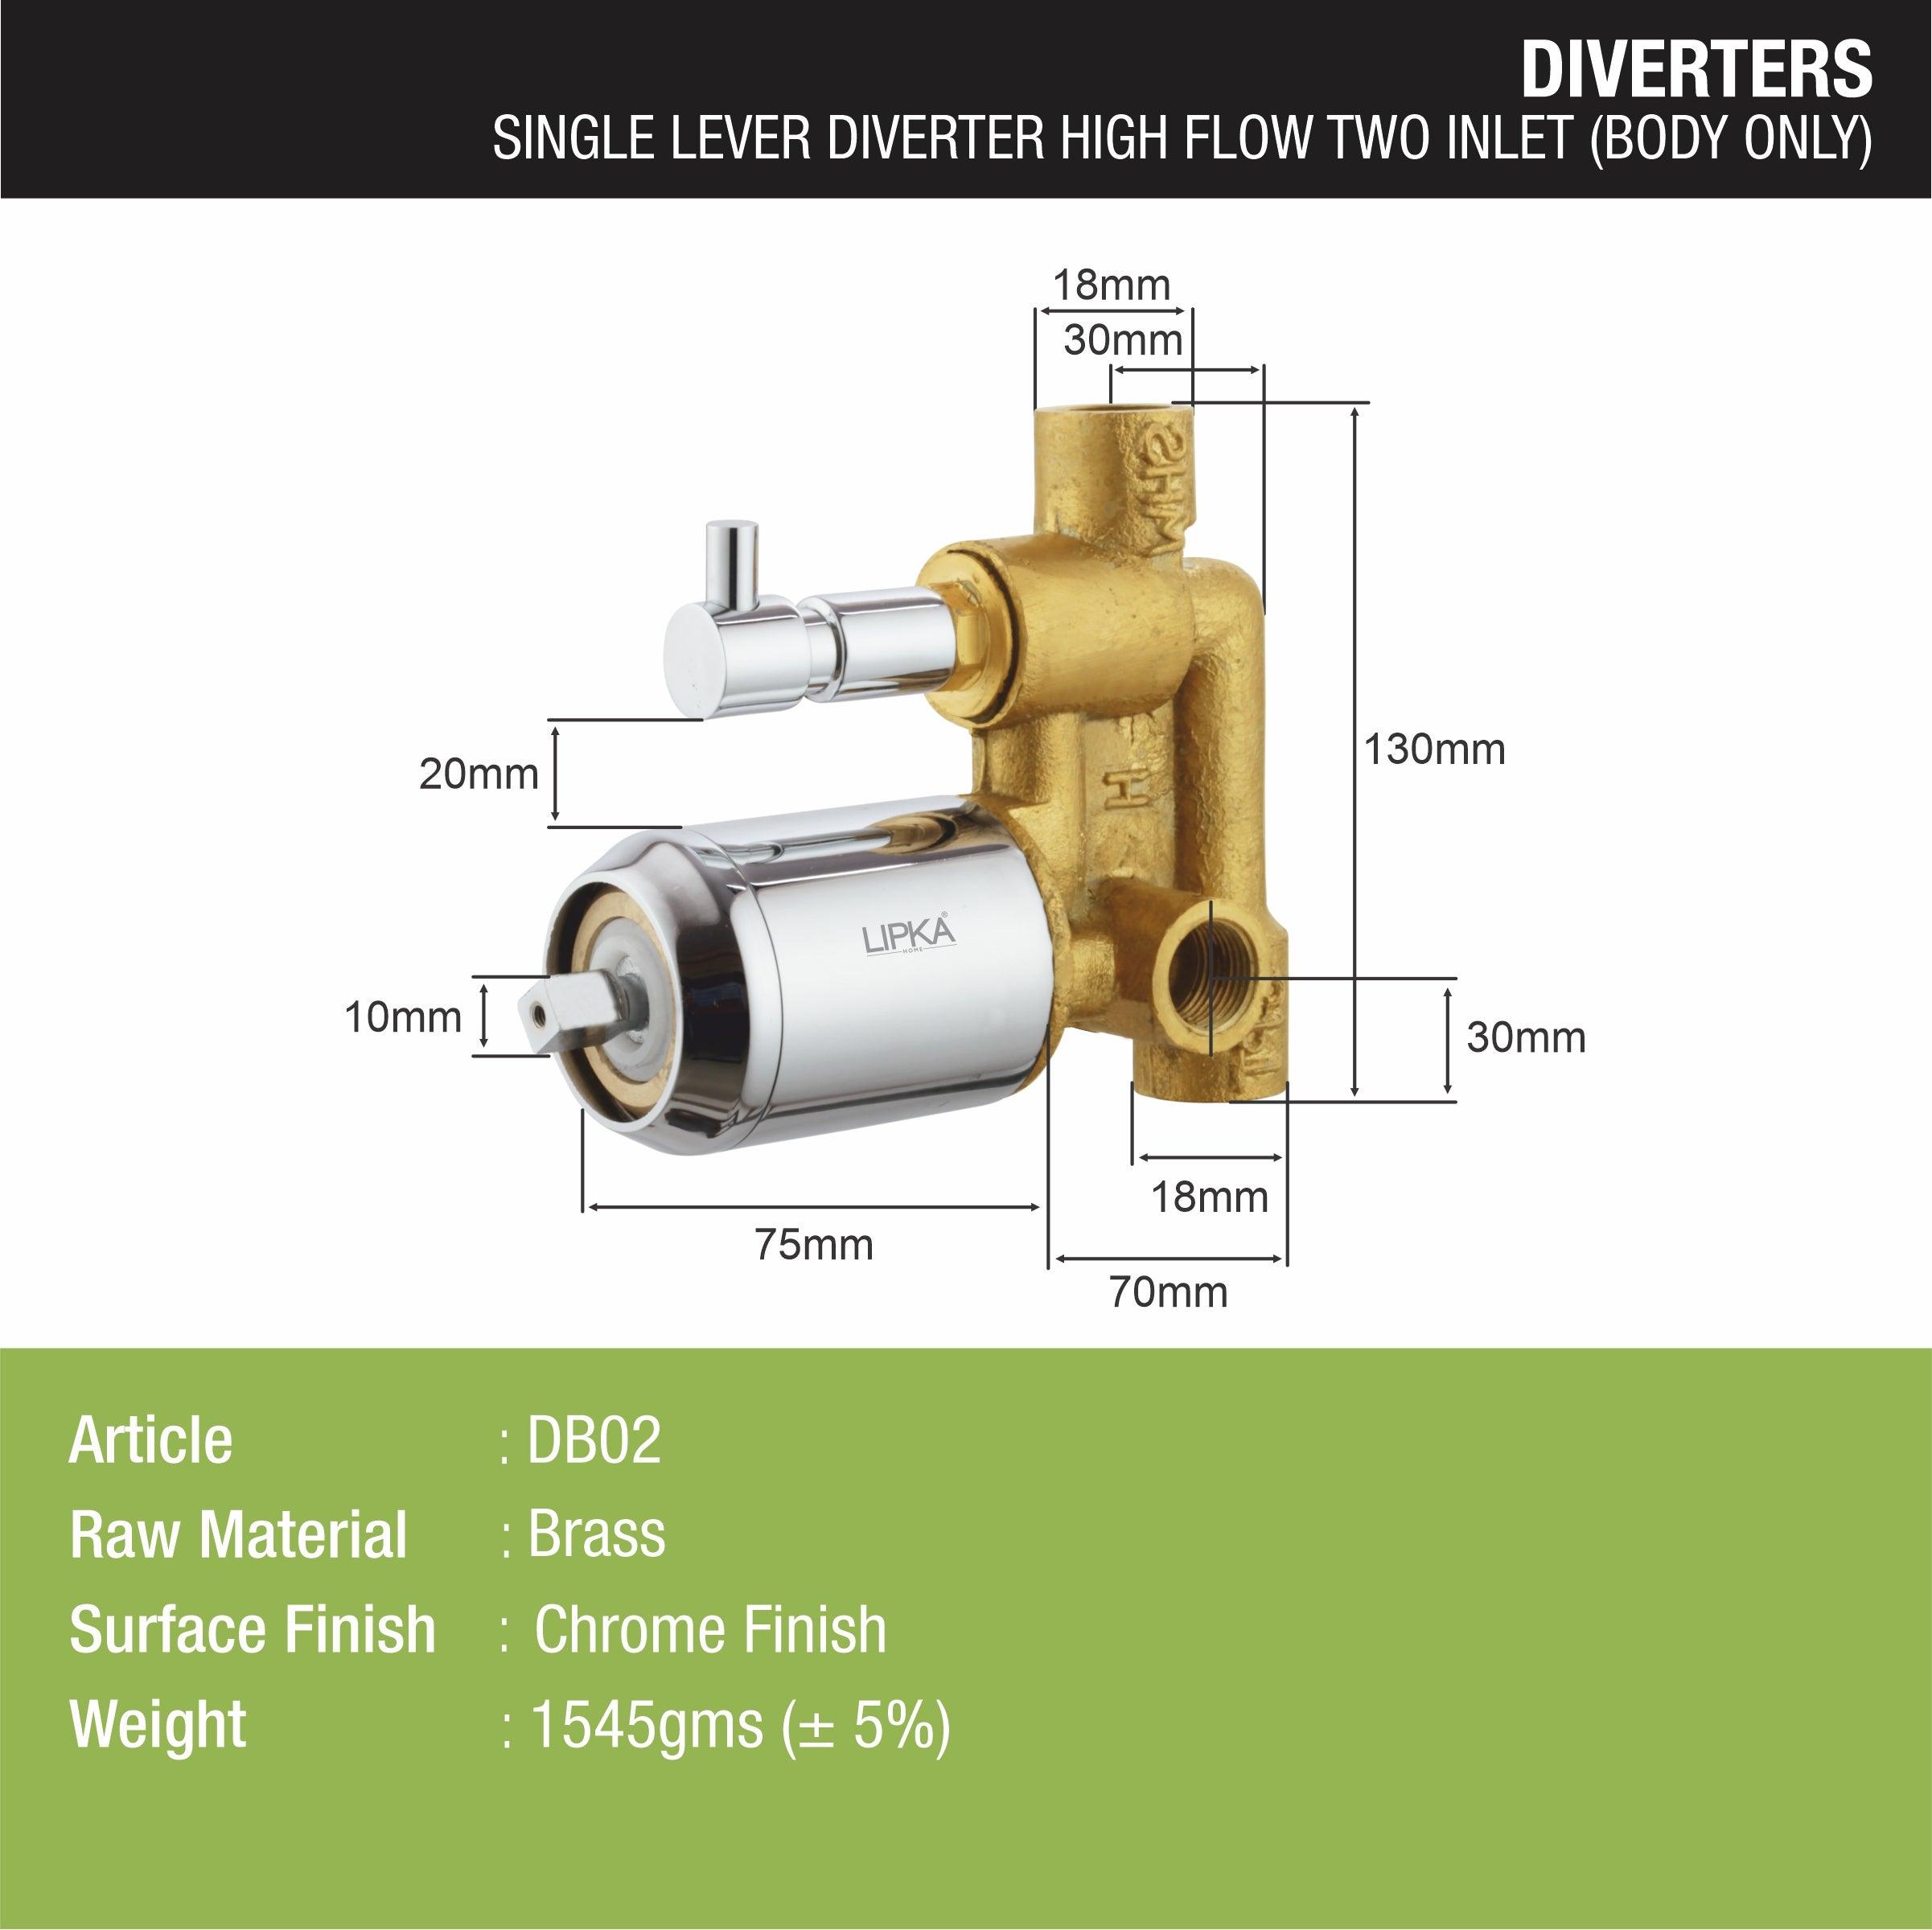 2-inlet Single Lever High-Flow Diverter (Only Body) sizes and dimensions